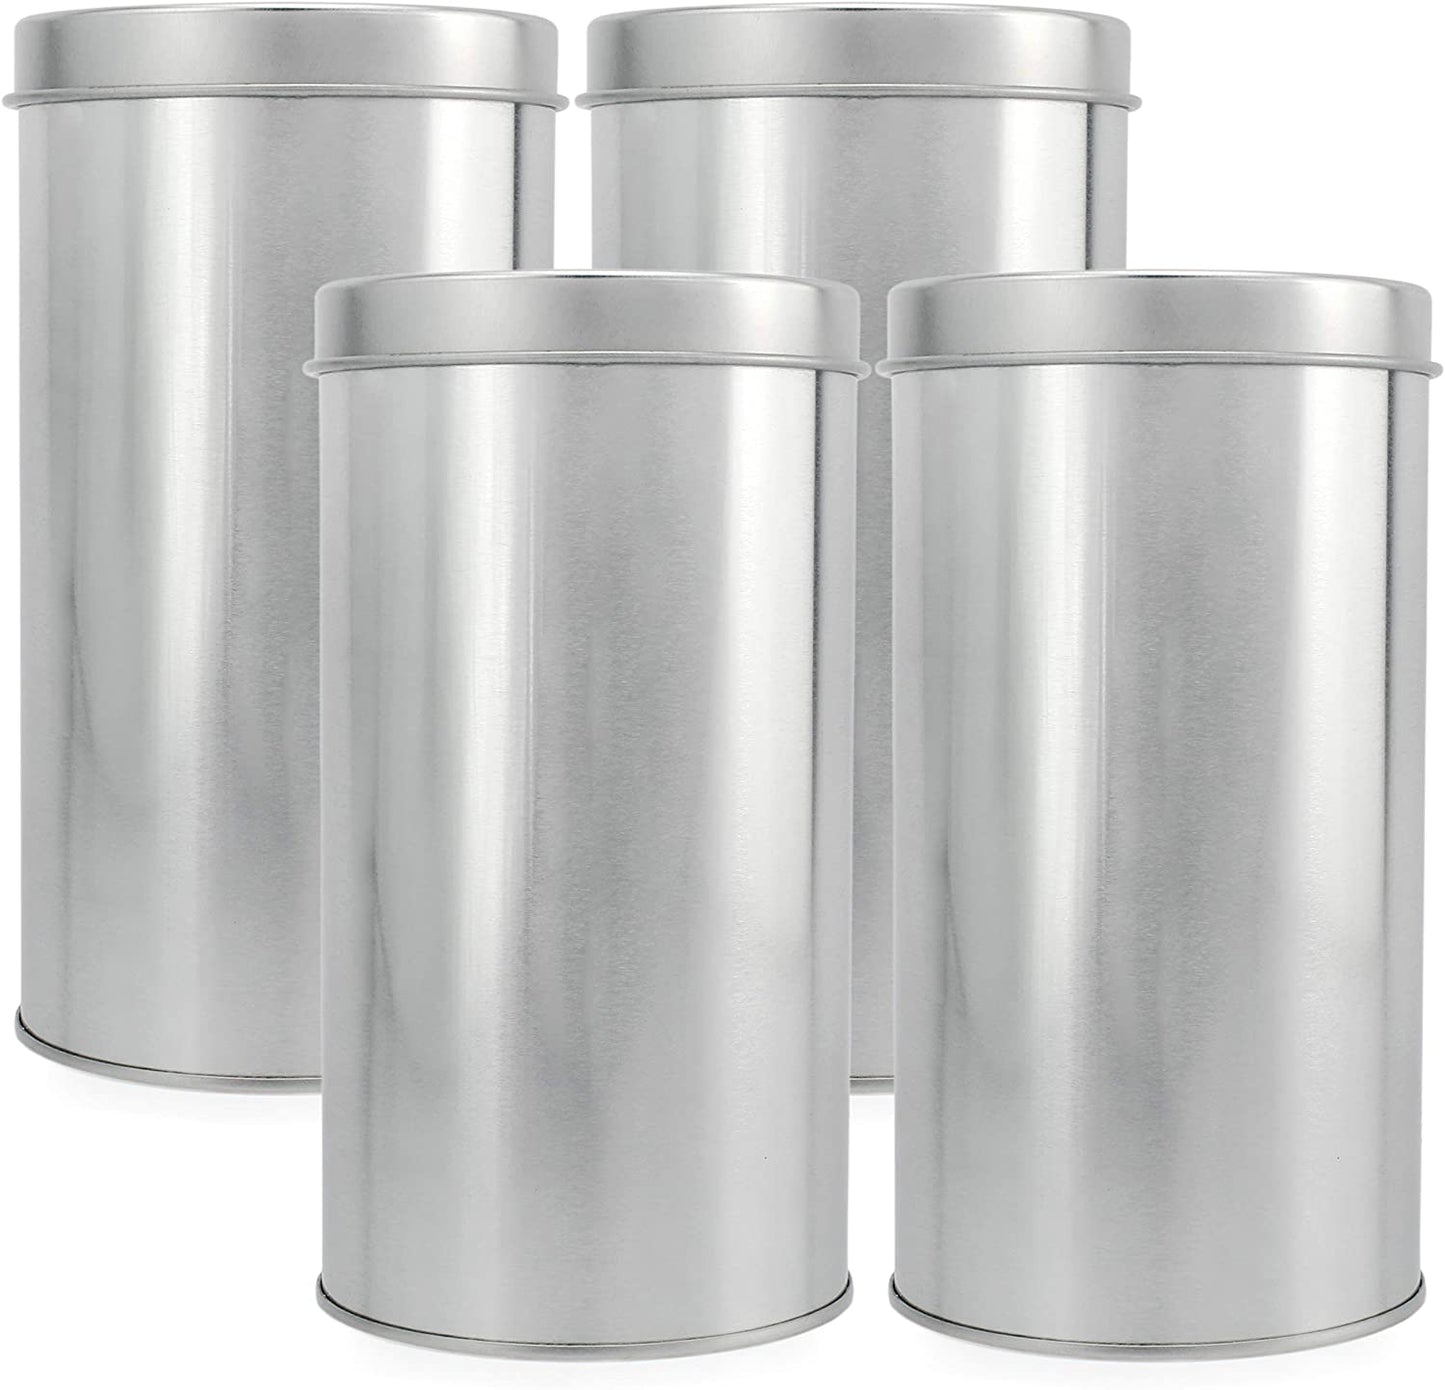 Double Seal Tea Canisters